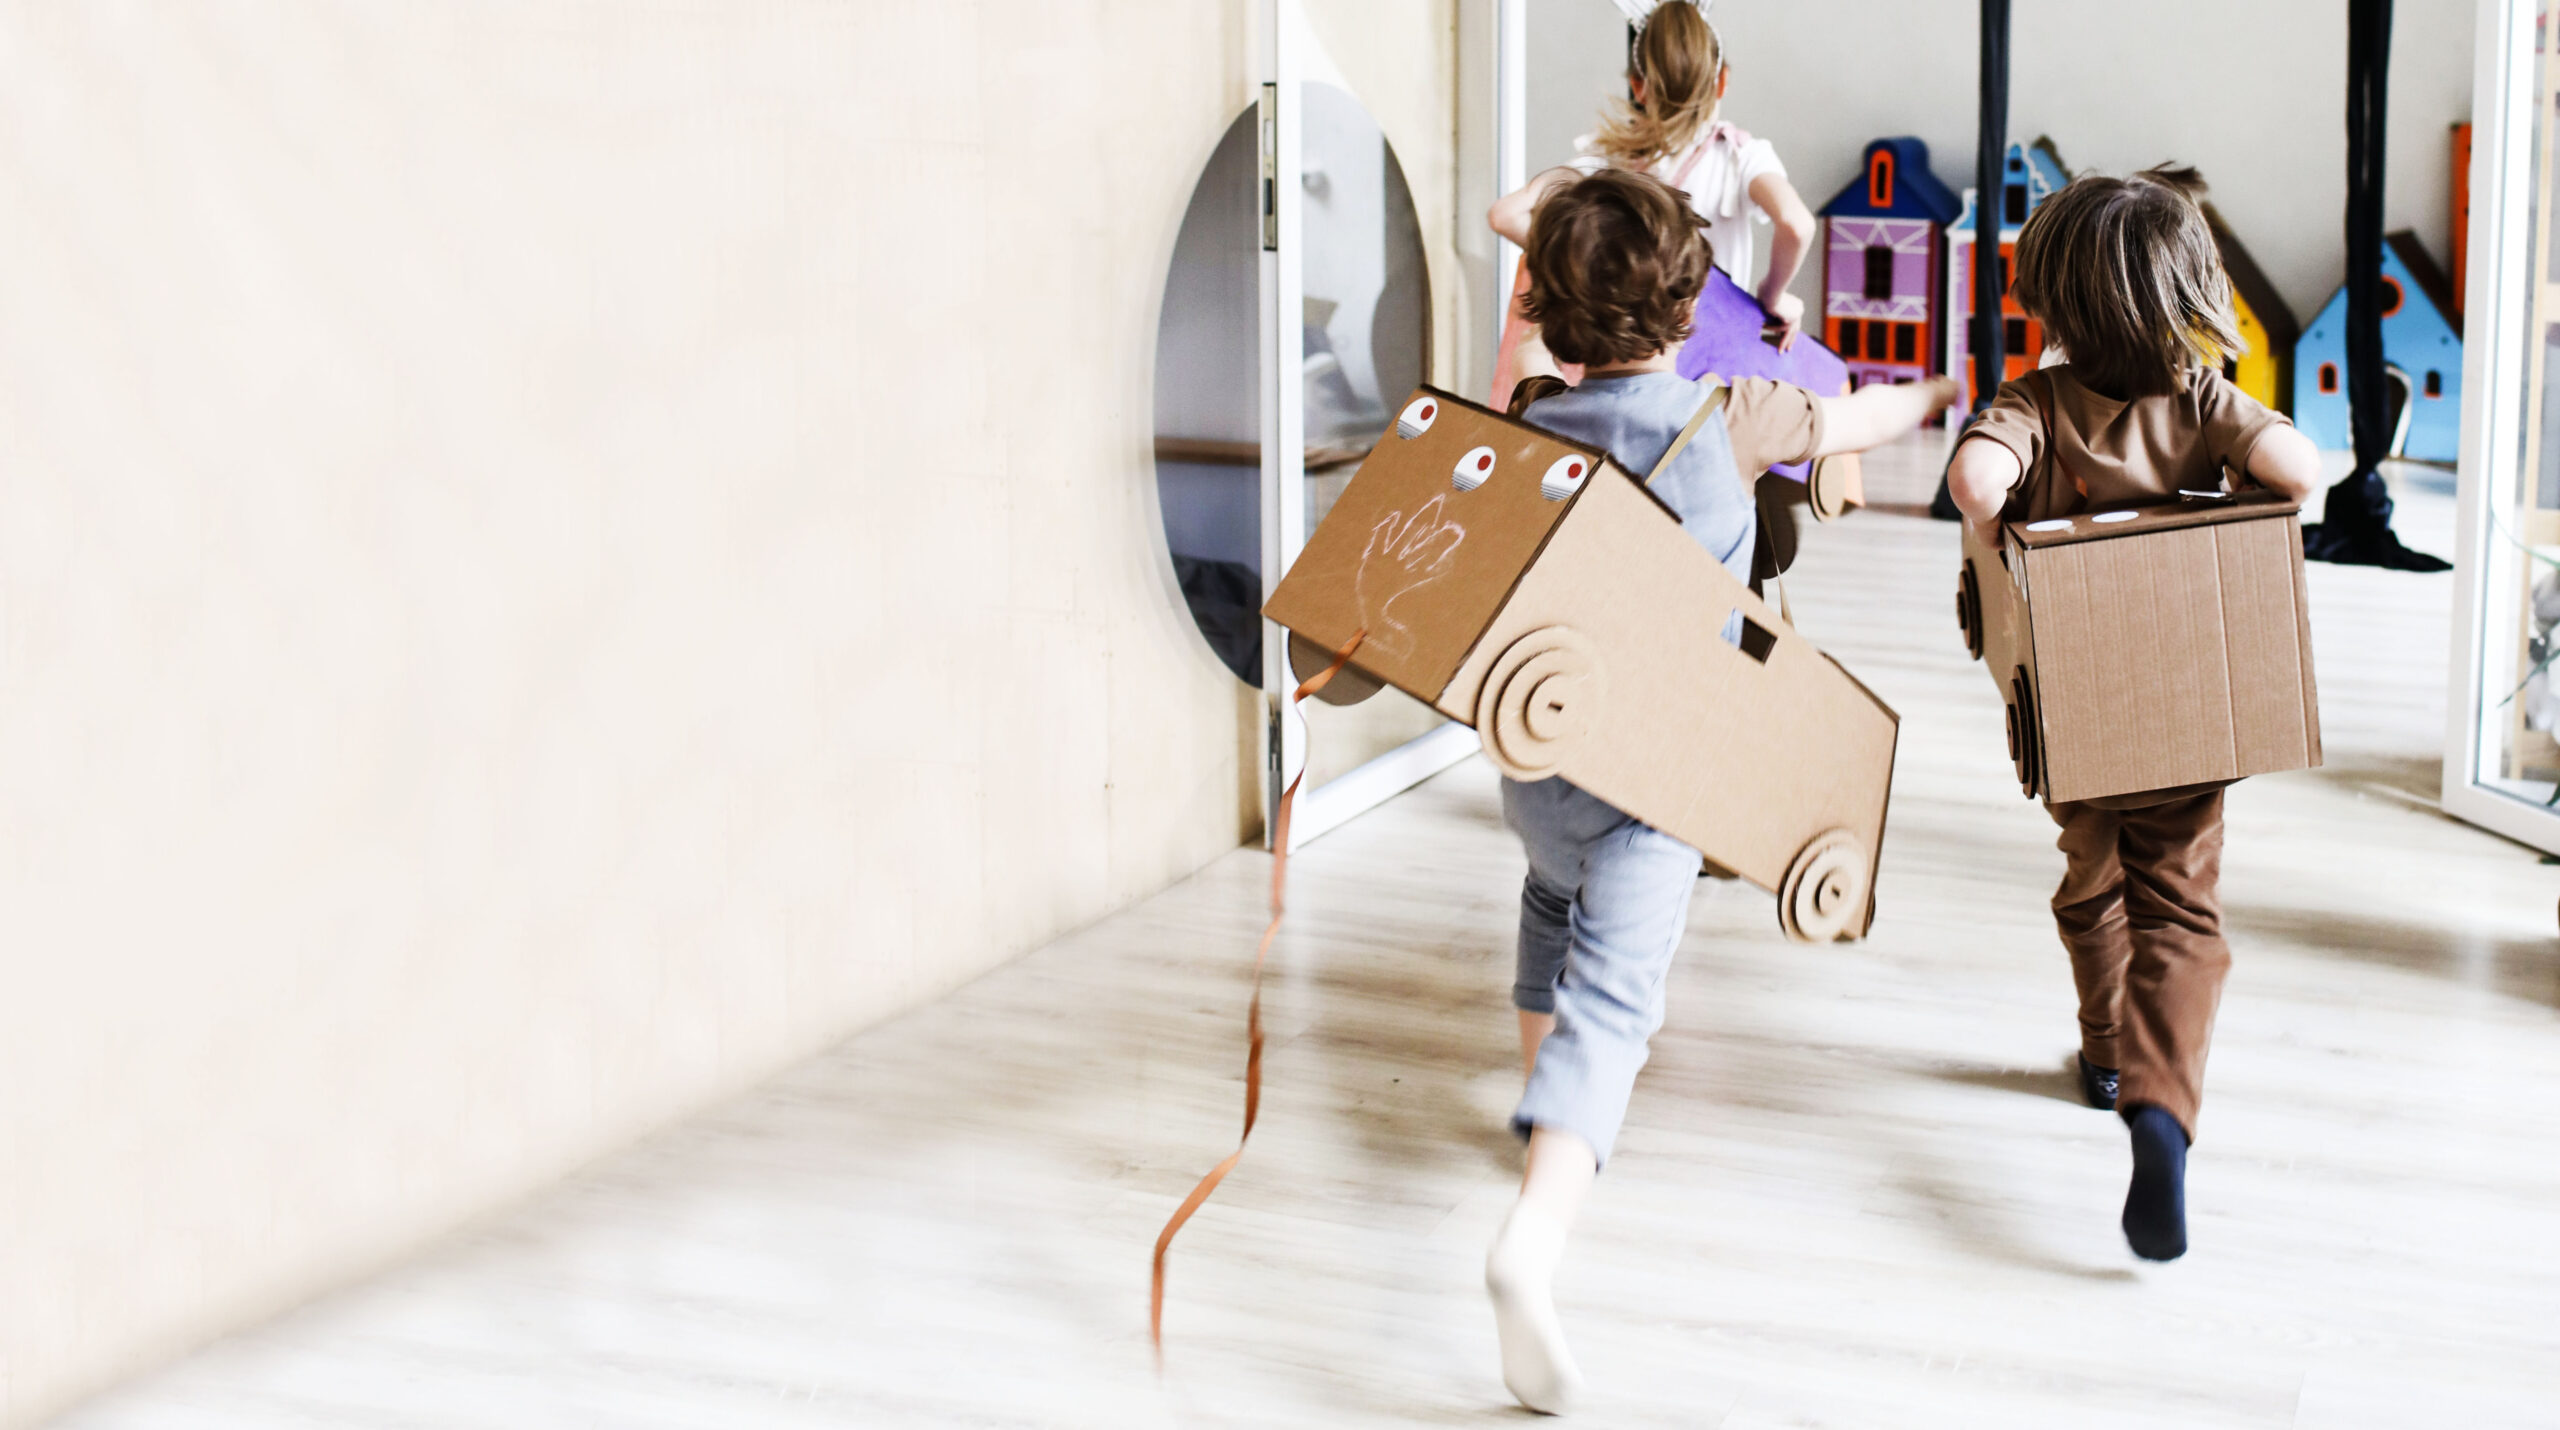 imaginative play with cardboard boxes